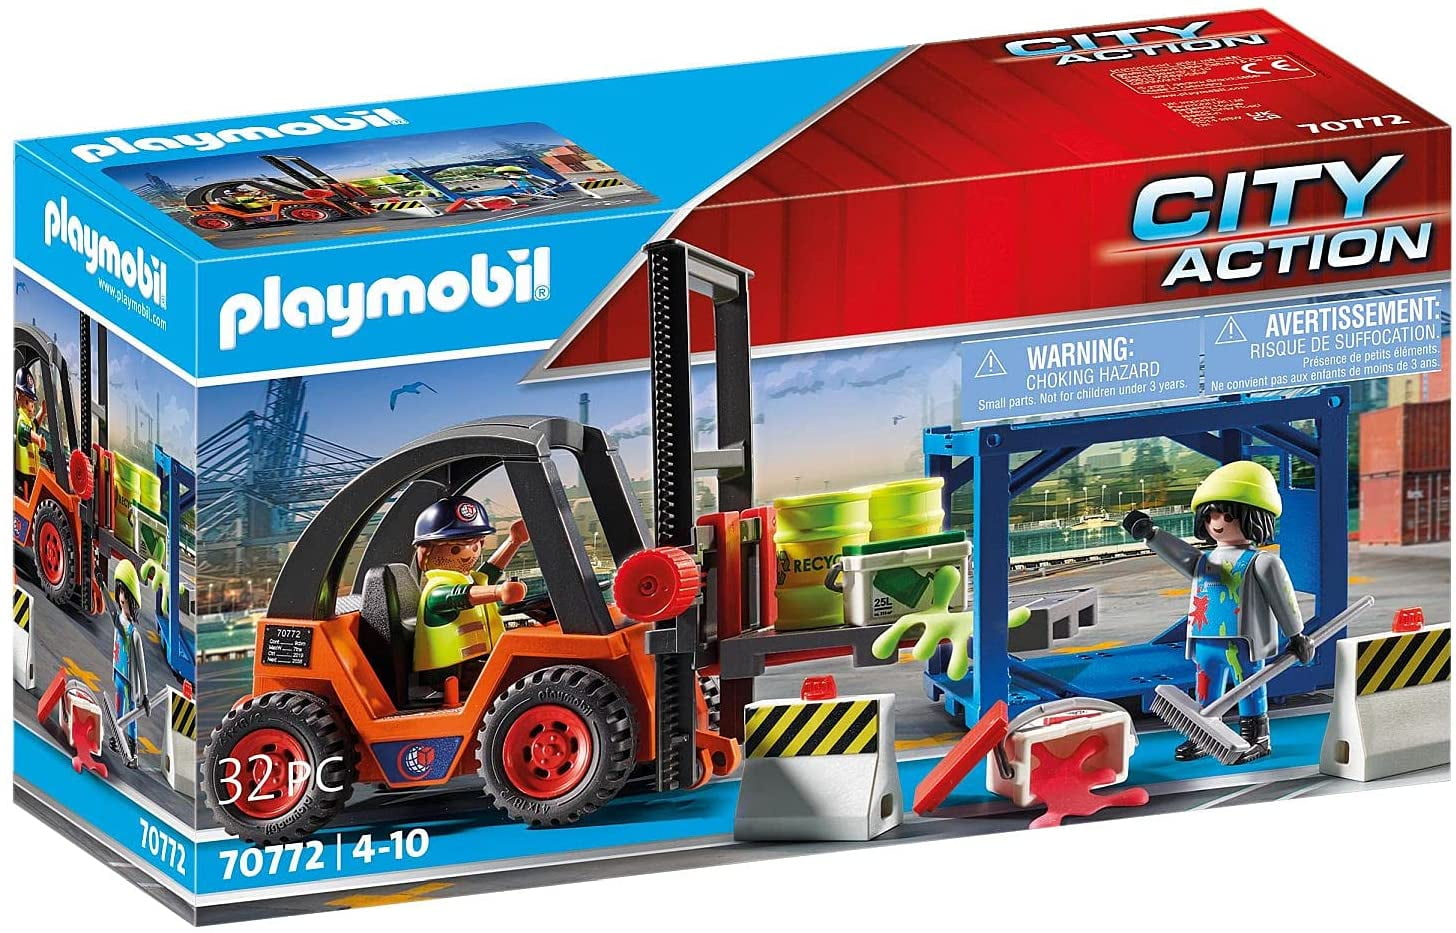 Wanorde Kruipen natuurpark PLAYMOBIL City Action 70772 forklift with lifting function, container  module and heavy-duty pallet and other accessories - Walmart.com